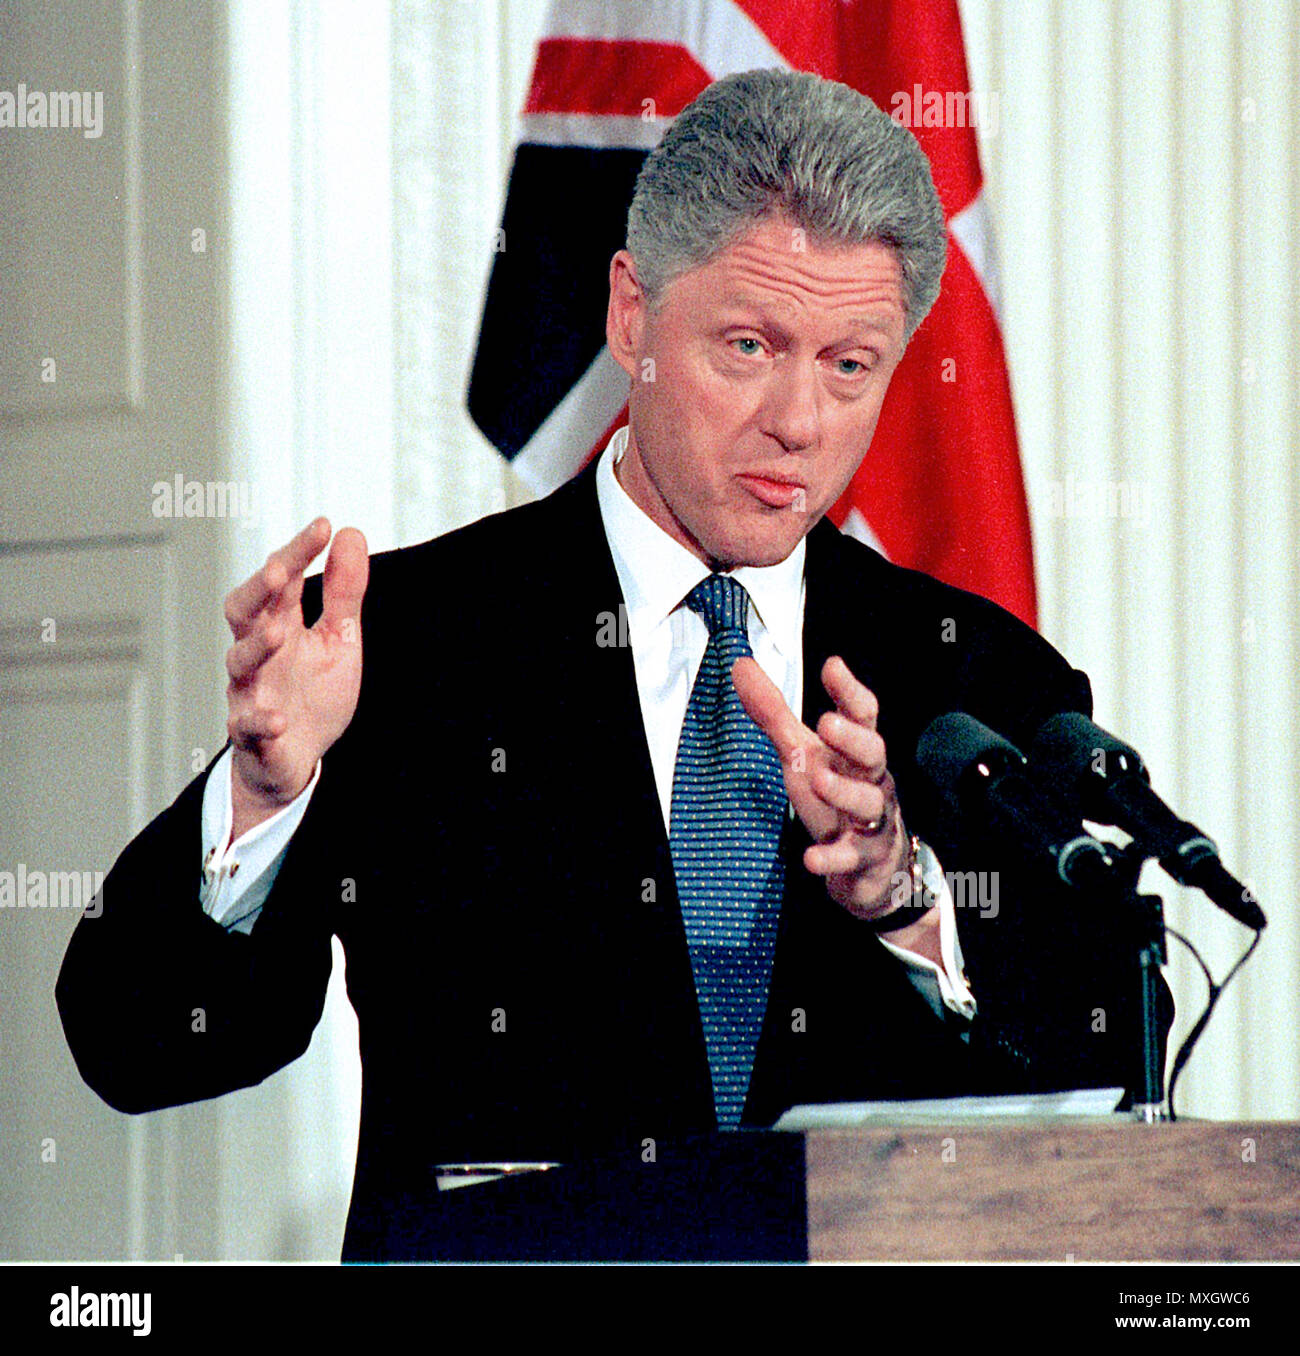 ***FILE PHOTO*** Bill Clinton Has Not Apologized To Monica Lewinsky And Claims Did The Right Thing Staying In Office.  United States President Bill Clinton gestures as he answers a reporter's question during his joint press confrence with Prime Minister Tony Blair of Great Britain in the East Room of the White House in Washington, DC on February 6, 1998. Credit: Ron Sachs / CNP/ MediaPunch Stock Photo